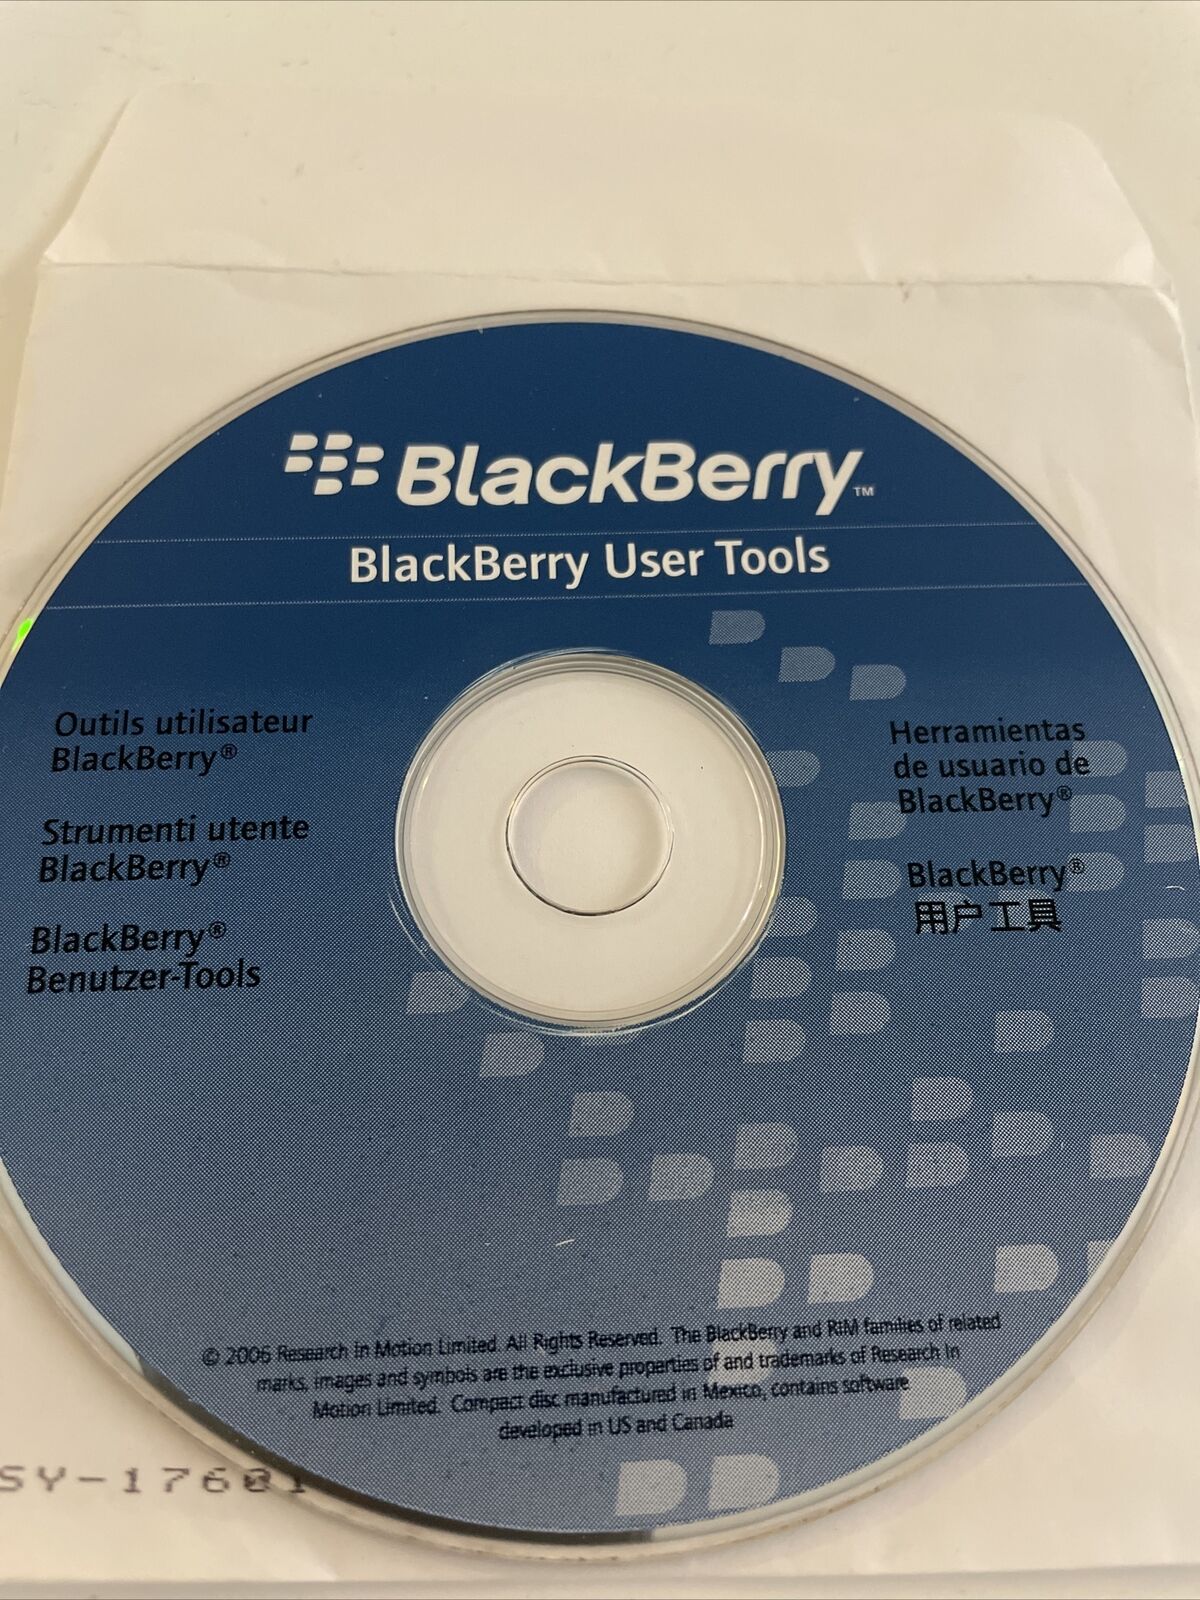 2006 BLACKBERRY USER TOOLS CD-ROM SOFTWARE DISC / MANUAL